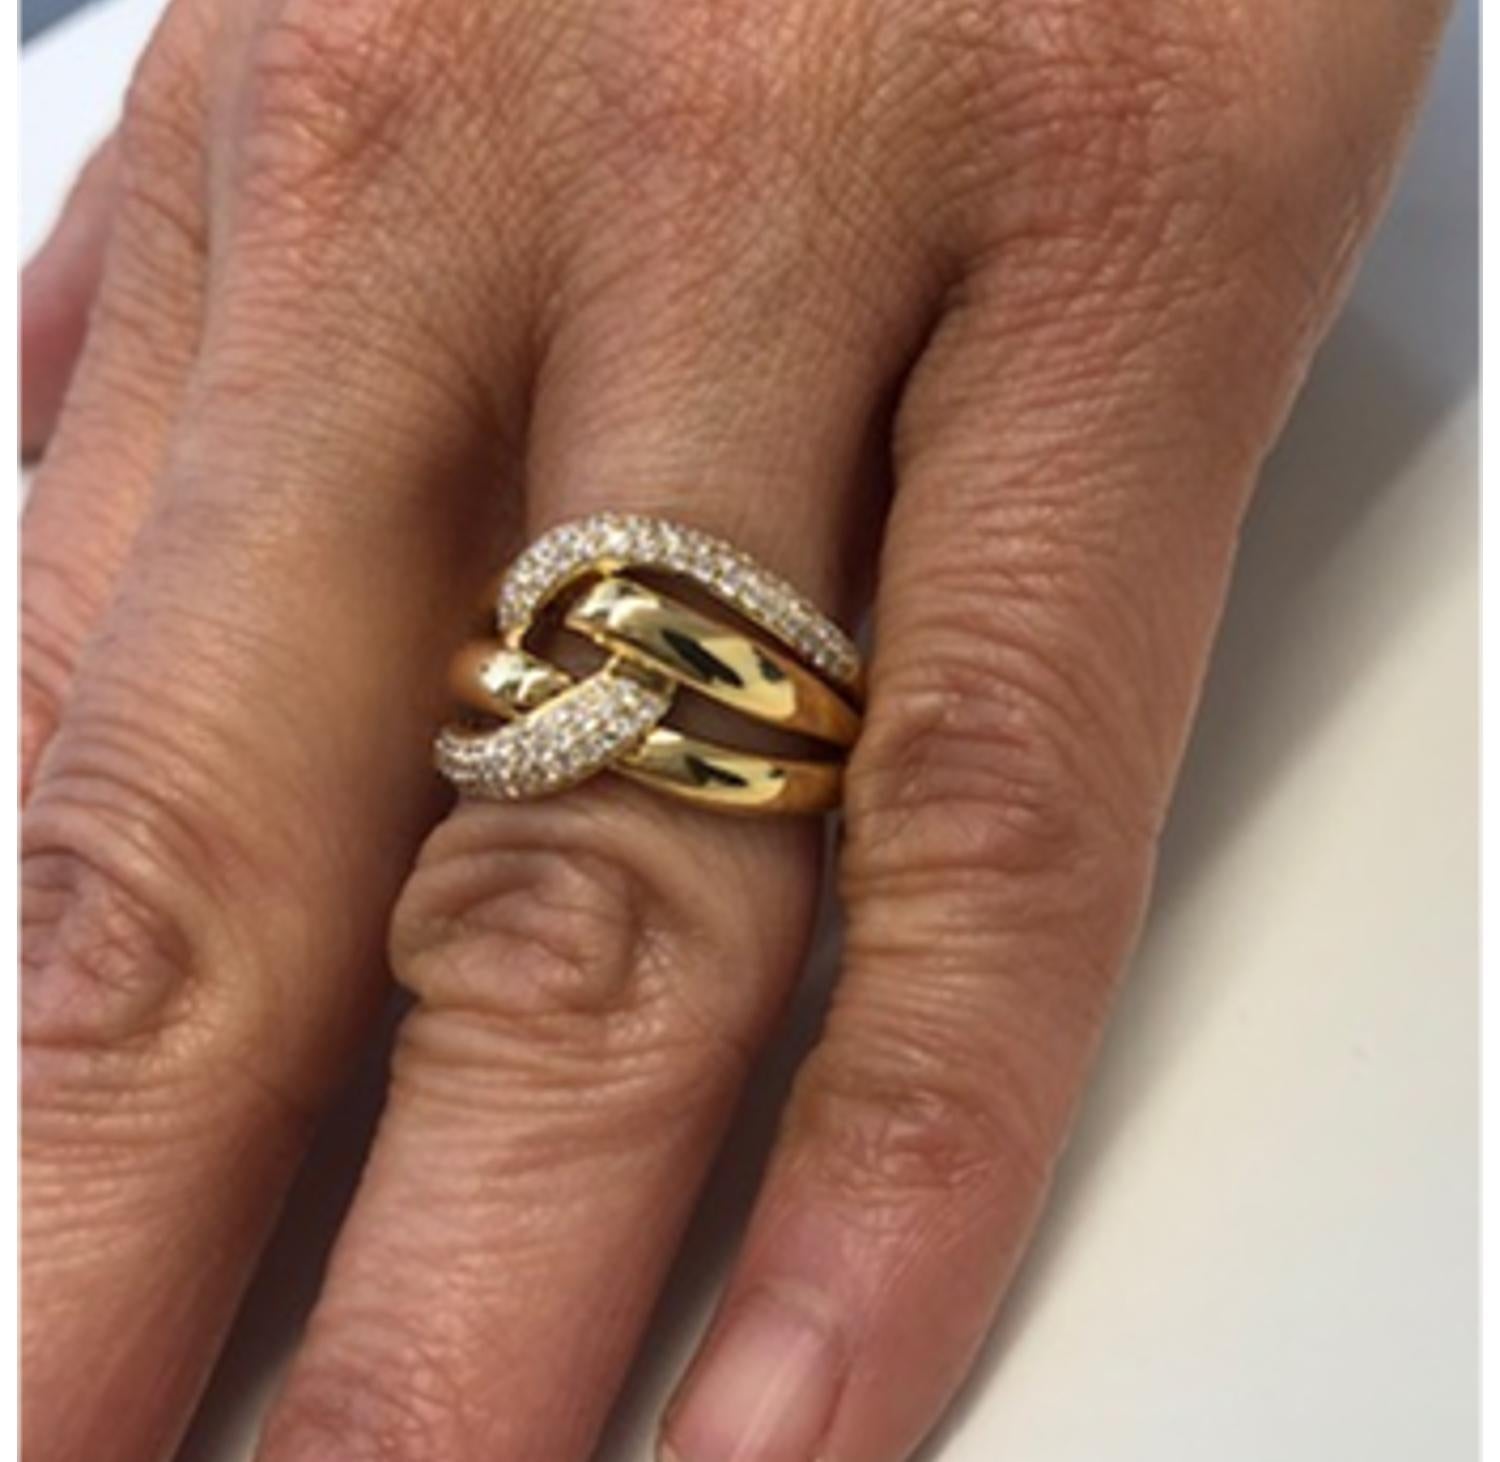 Sparkly round brilliant cut diamonds weighing a total of .63 carats are pave set in this ring. It is a modern take on a classic woven knot design. So pretty and wearable! Make this one your signature piece. Made of 18k yellow gold.

Ring Size: